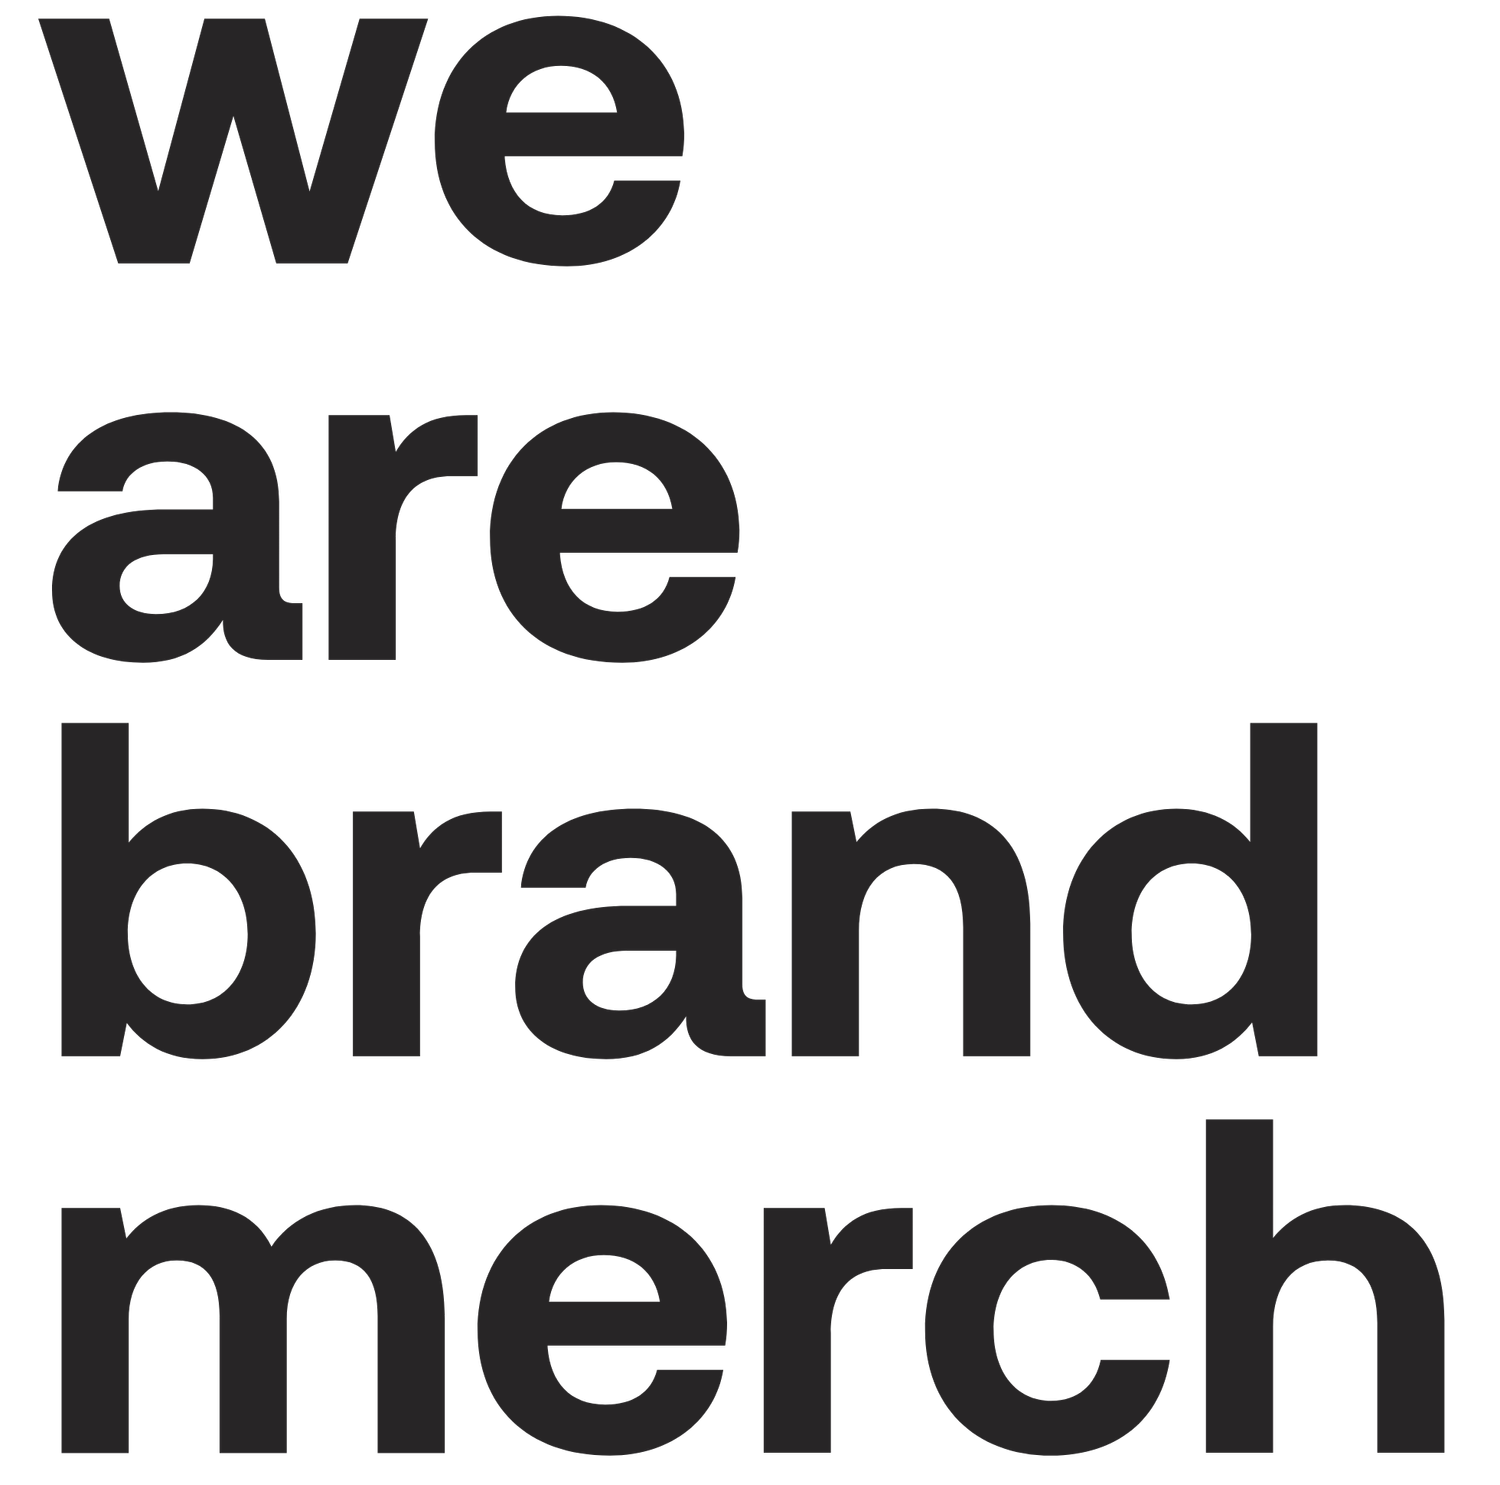 COLLECTIVE BRANDS